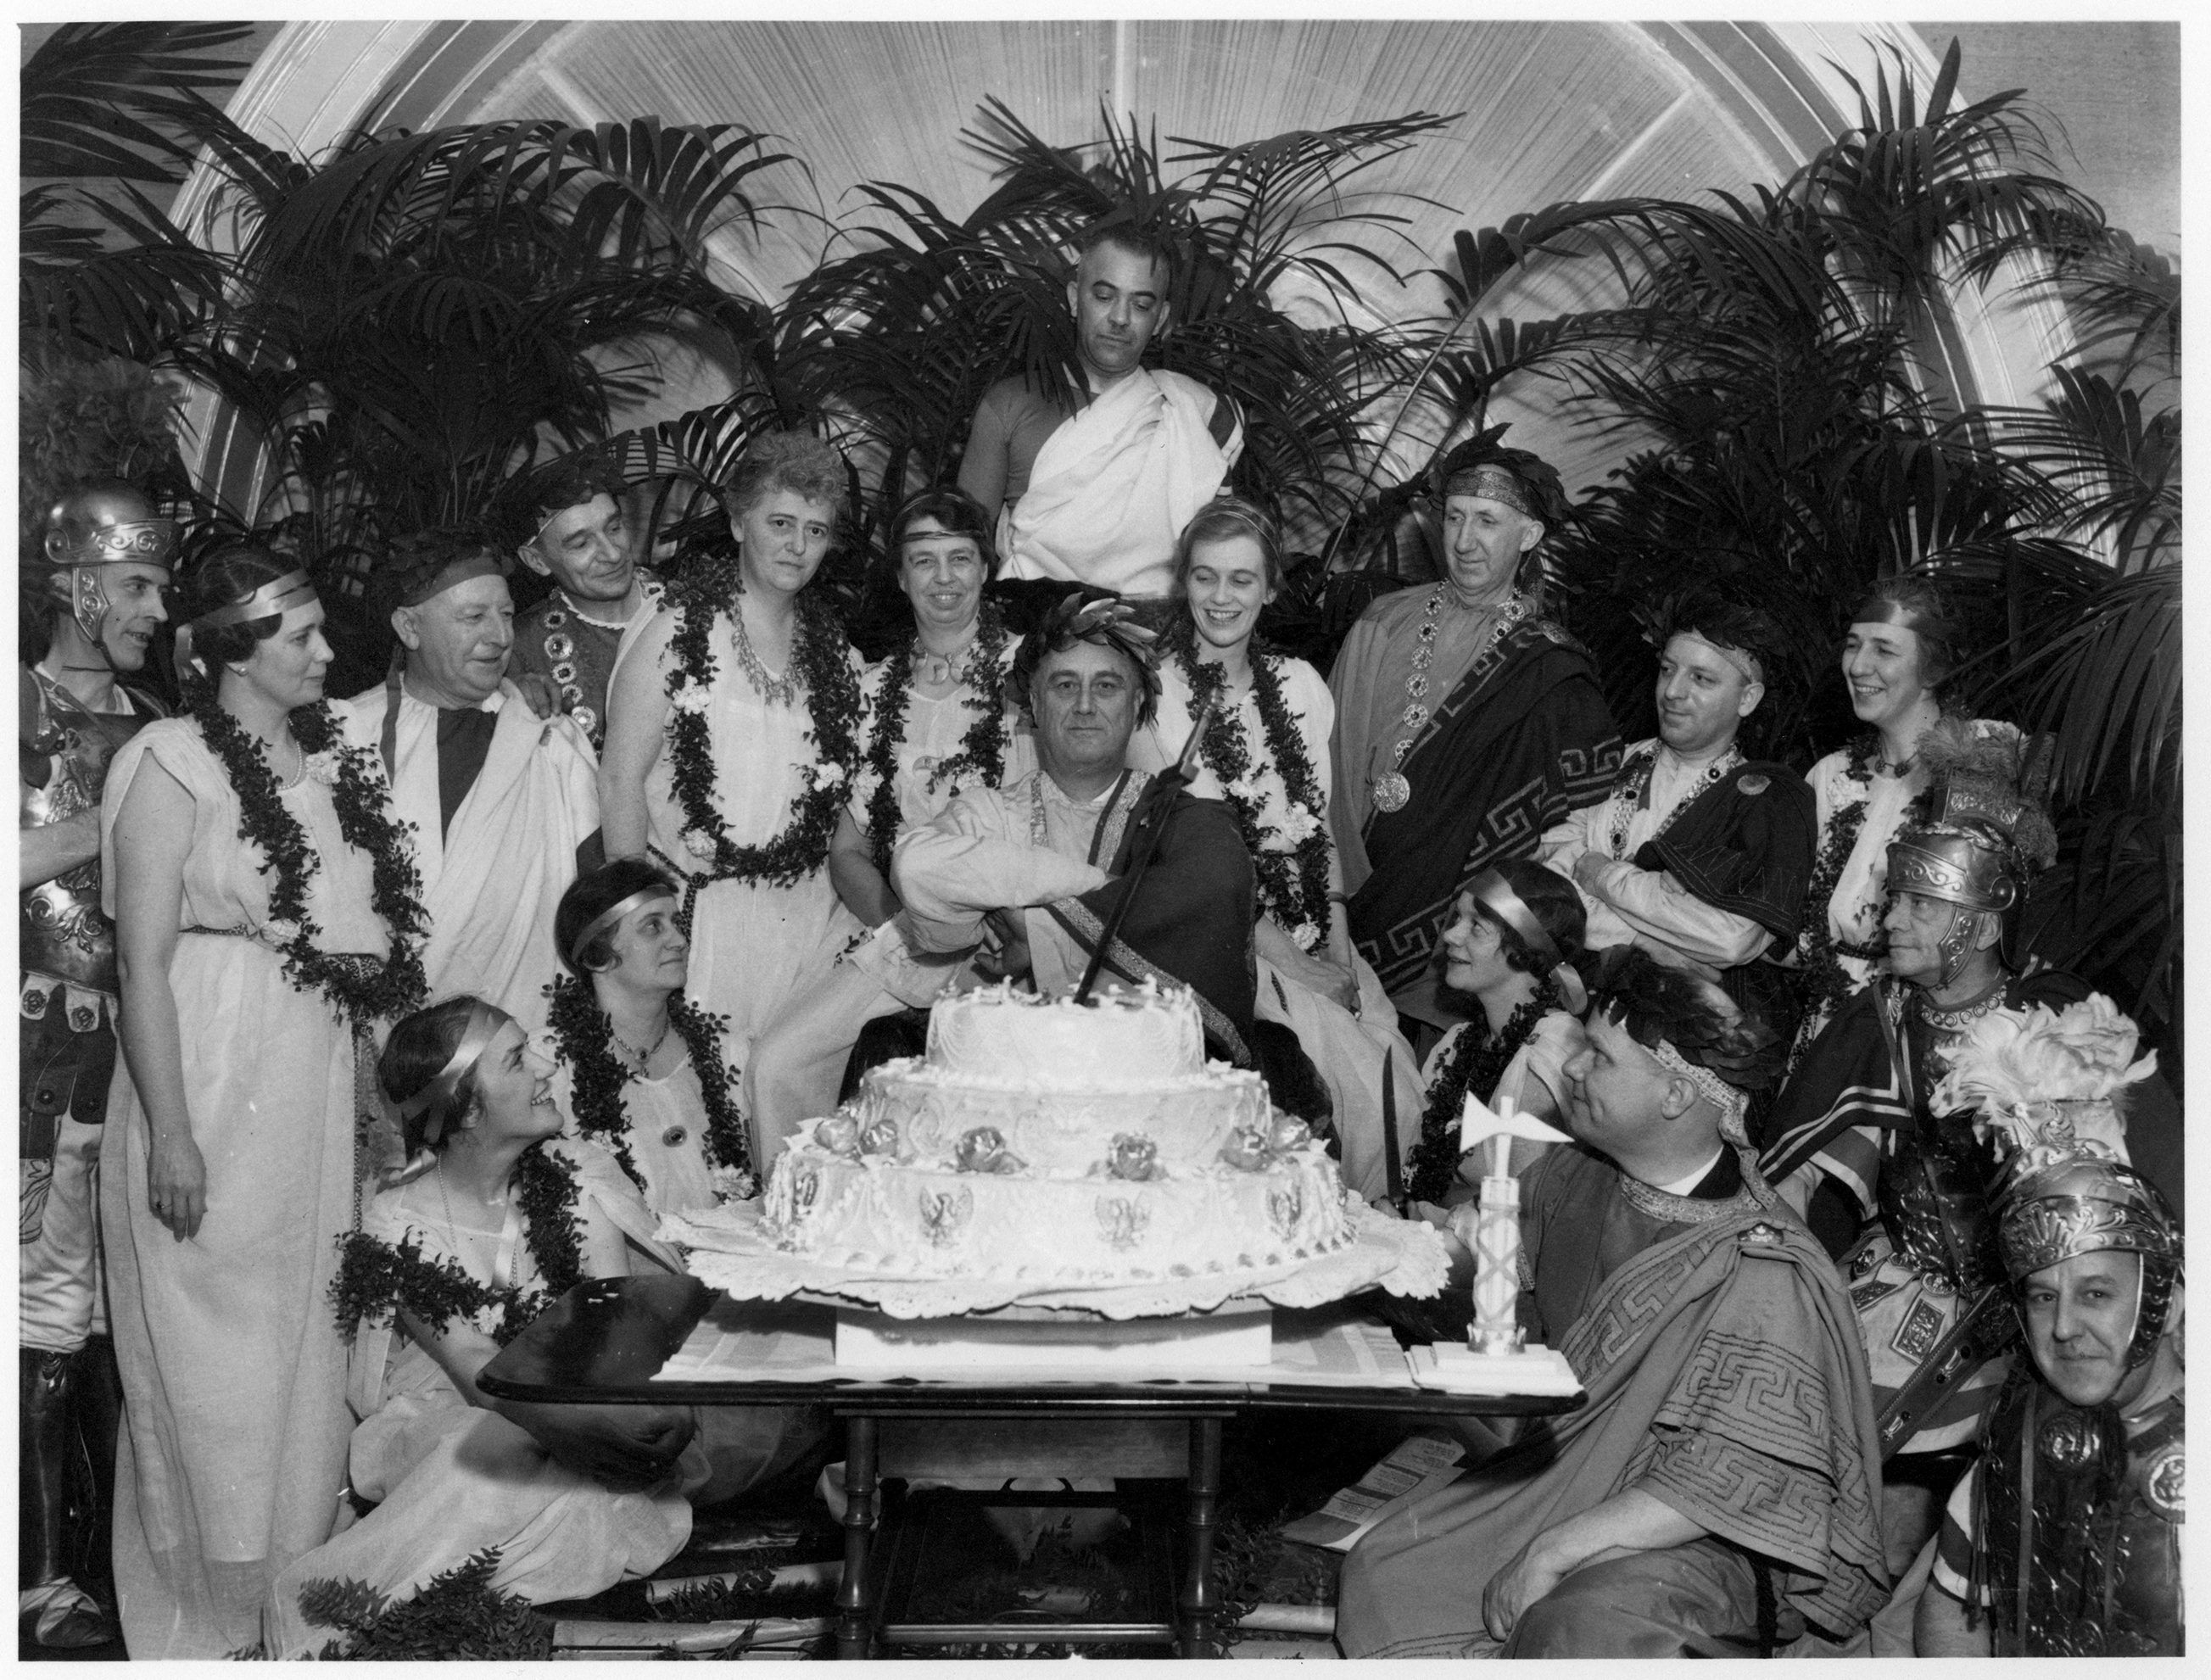 Franklin Delano Roosevelt (center) at a toga-themed party for his 52nd birthday, which was on Jan. 30, 1934. (FDR Presidential Library)